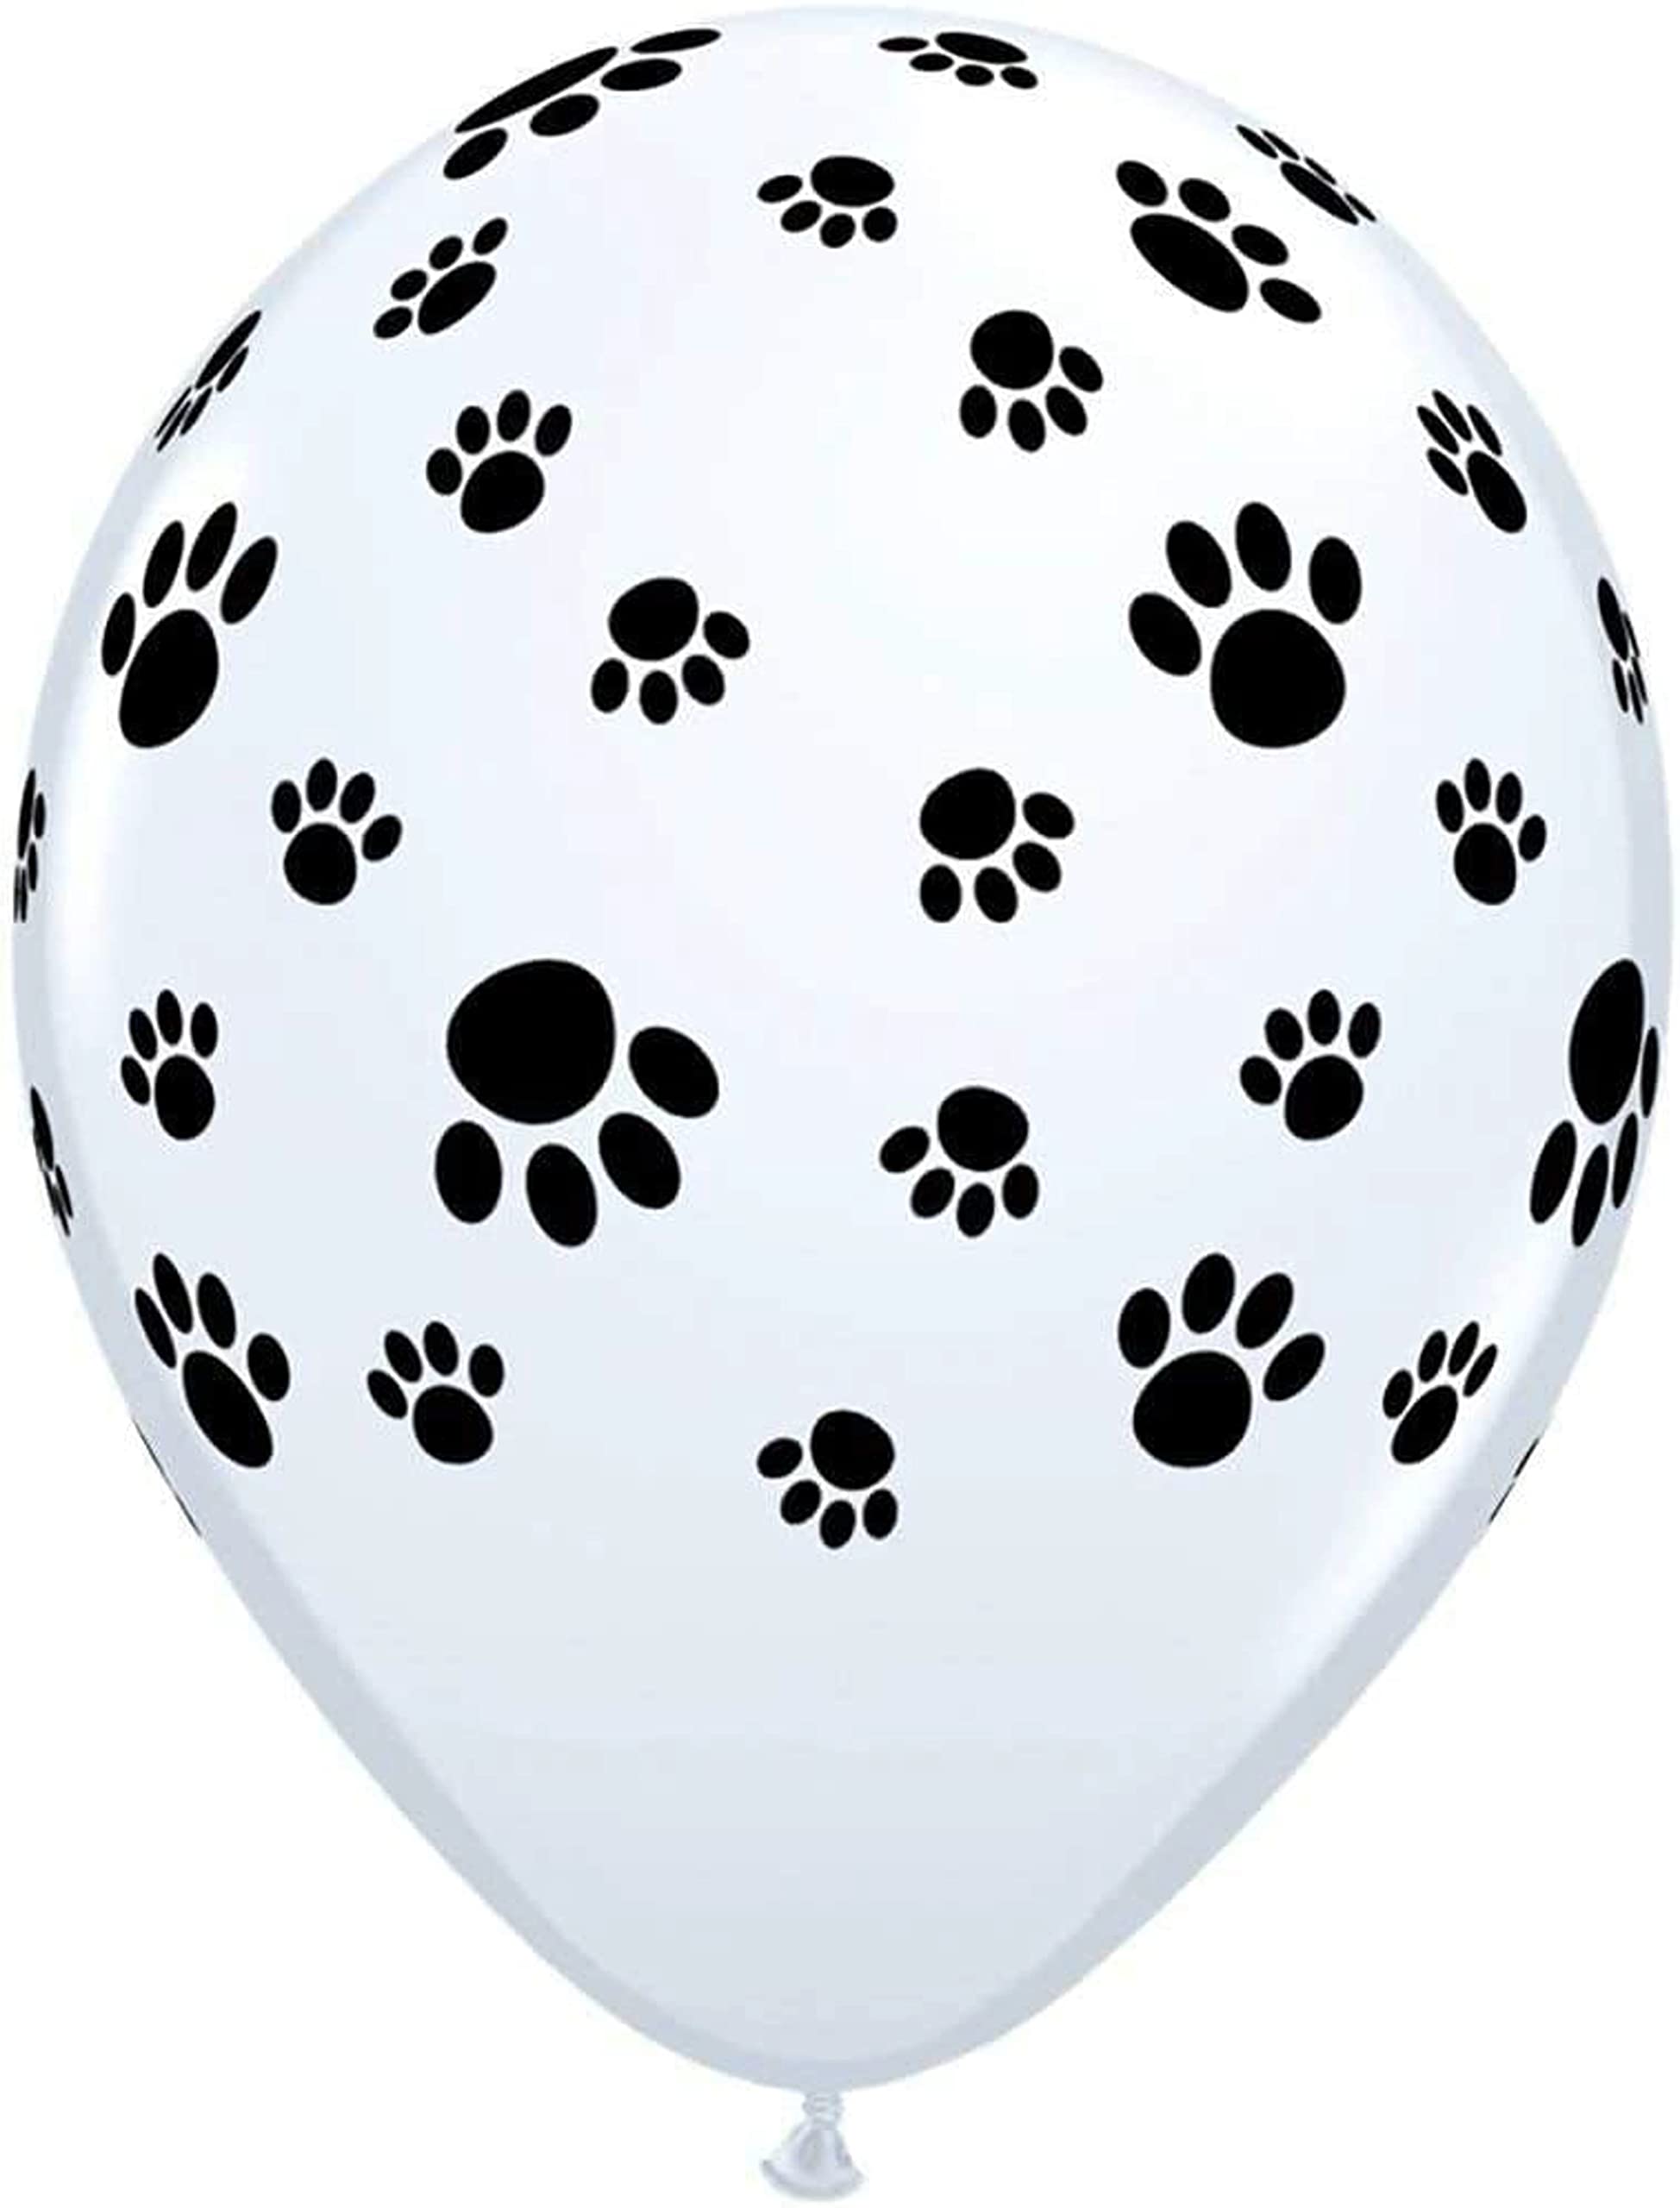 Paw Pups on Patrol Marshall 3rd Birthday Party Supplies Balloon Bouquet Decorations